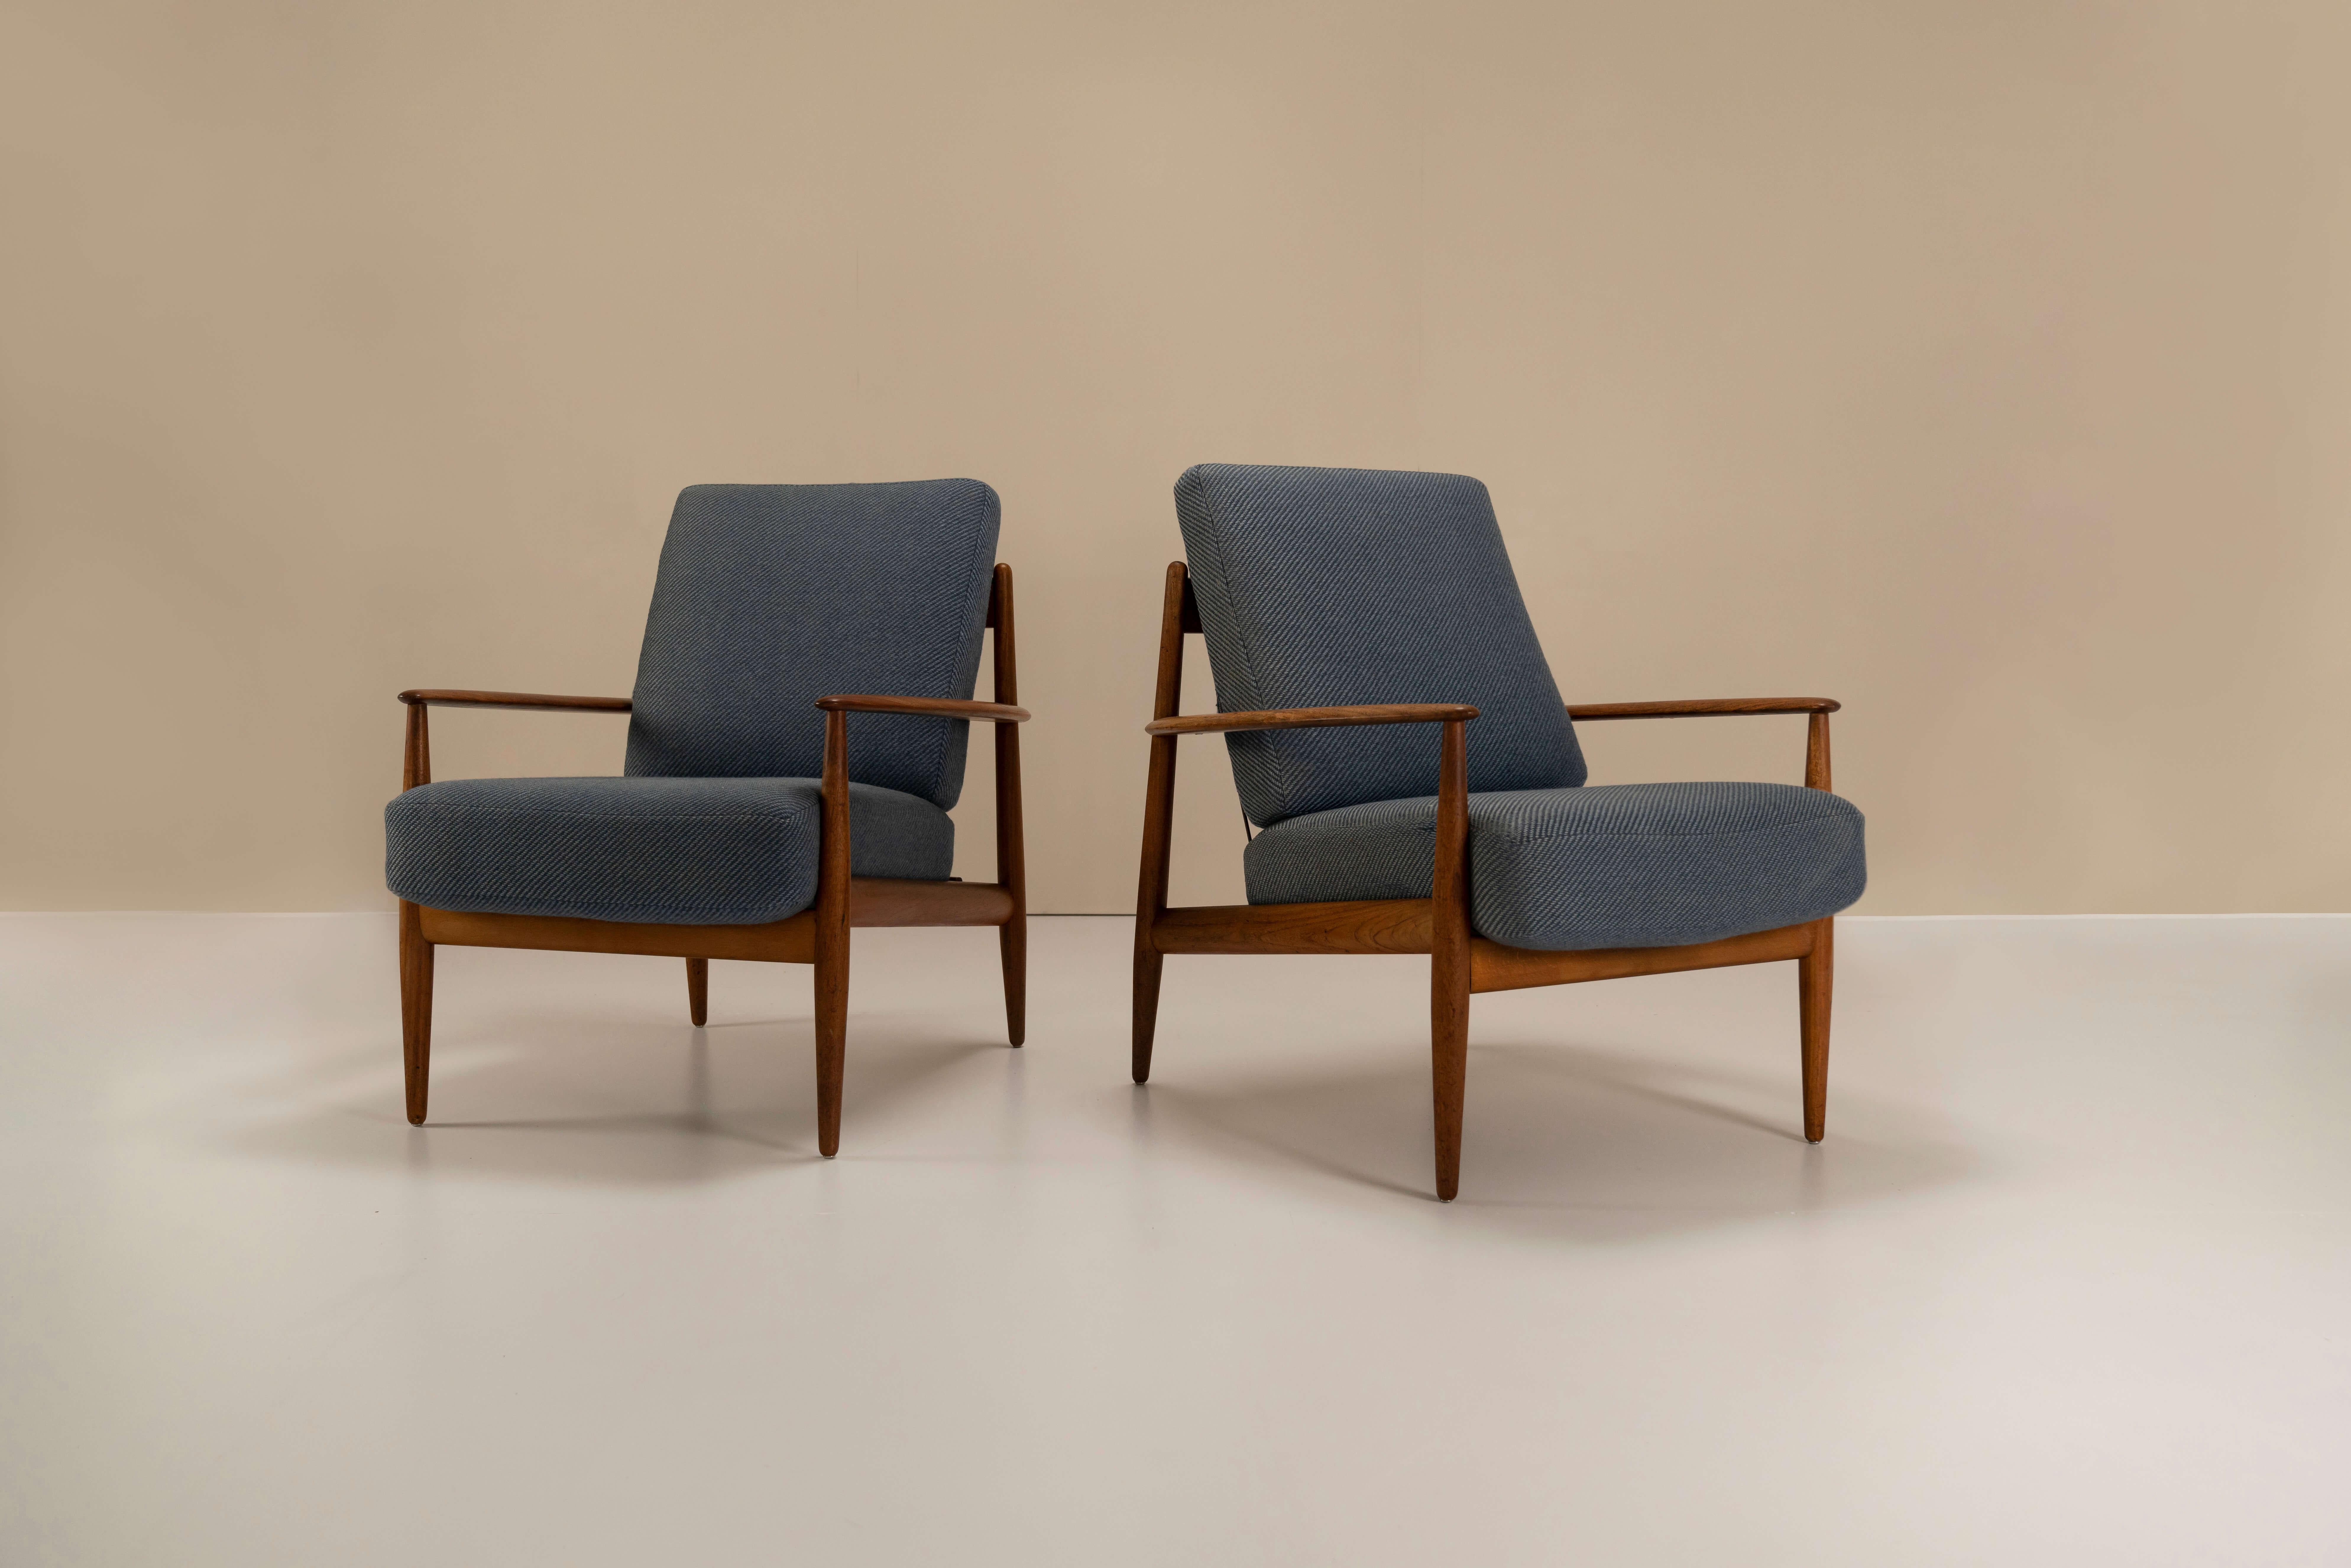 Charming pair of Grete Jalk Model 118 armchairs in teak and fabric for France & Daverkosen from 1955. These two comfortable chairs are the first of the model 118 series designed by Grete Jalk and manufactured in 1955. The frames of these completely